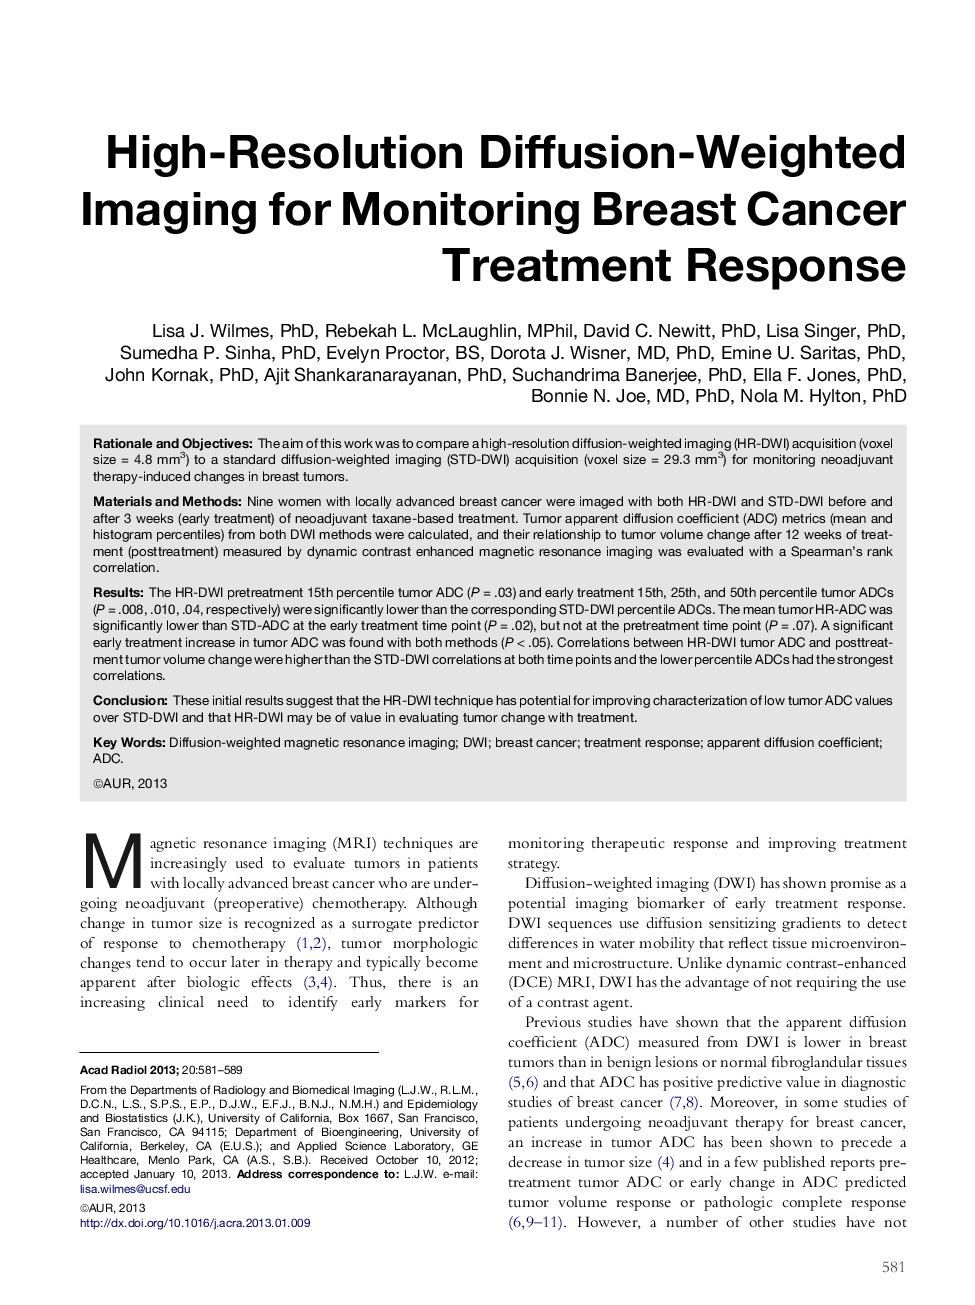 High-Resolution Diffusion-Weighted Imaging for Monitoring Breast Cancer Treatment Response